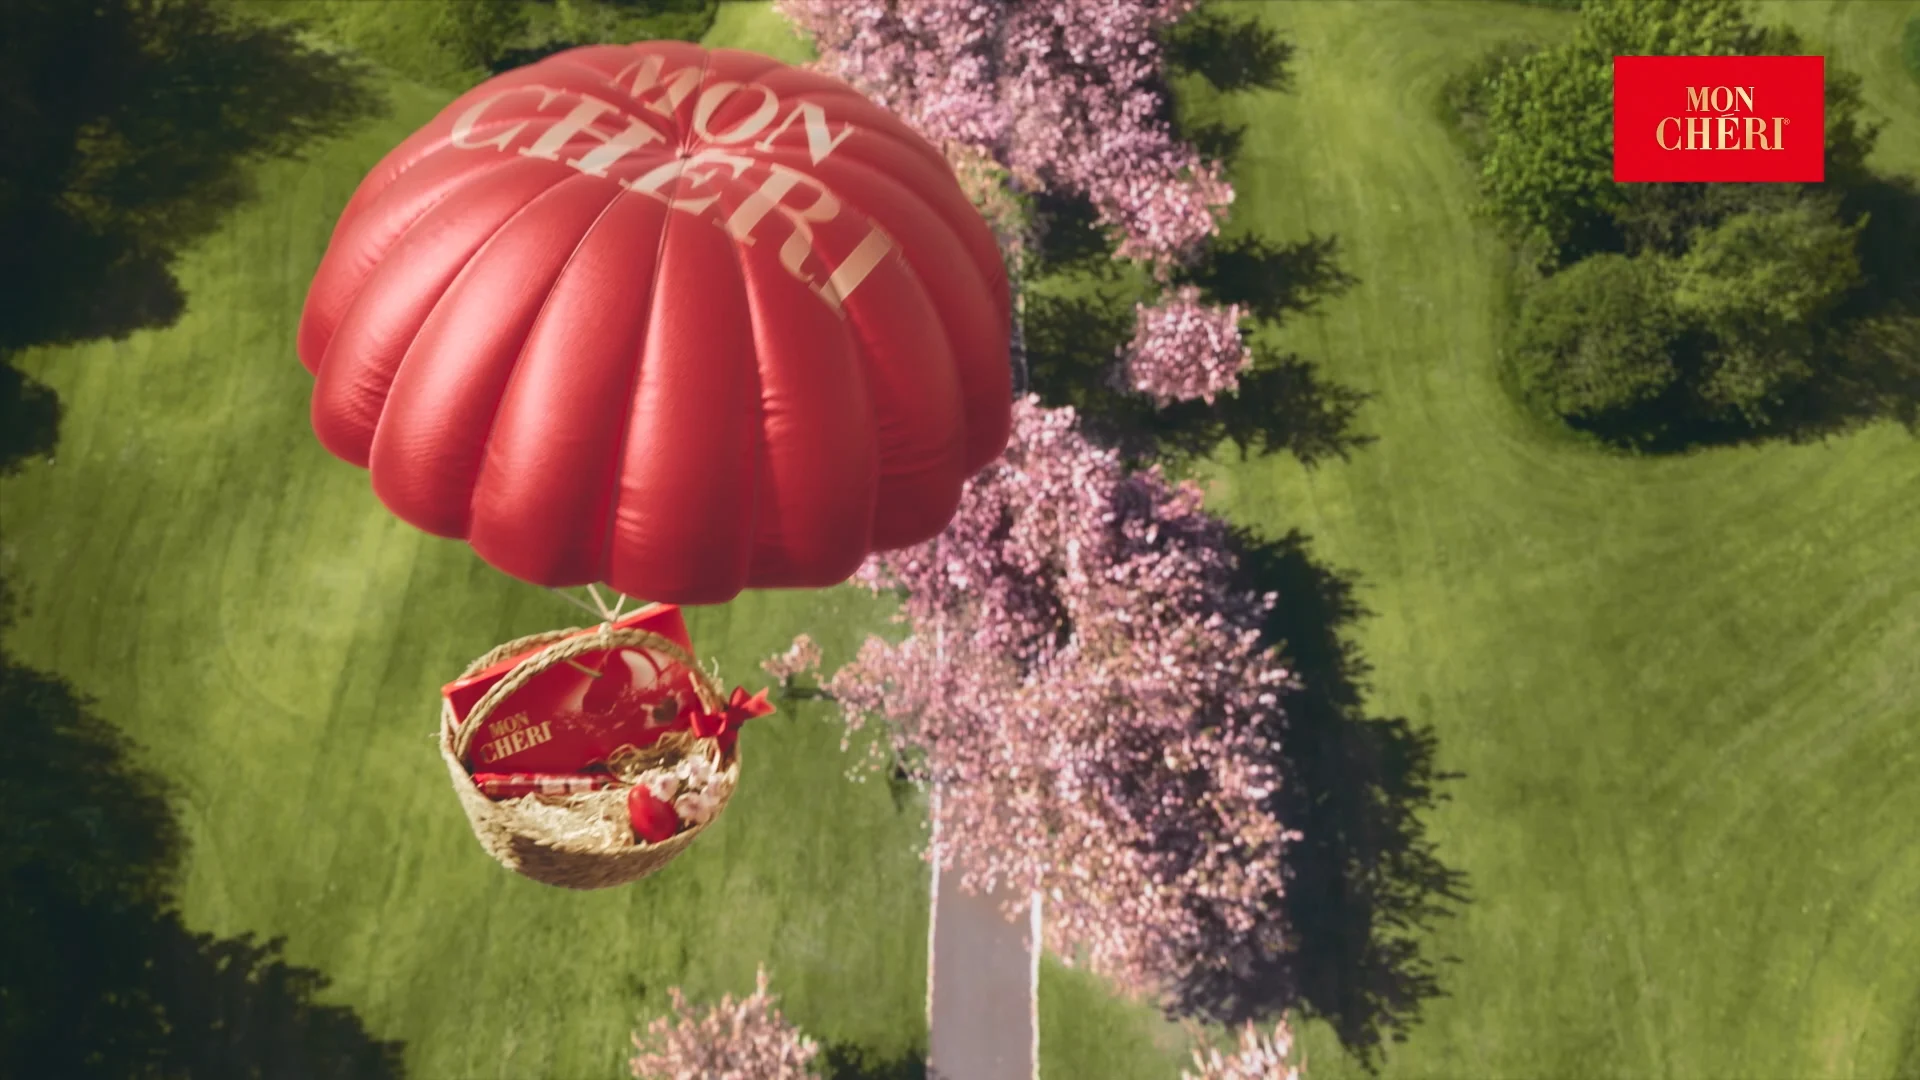 a top shot in which a red Mon Cheri parachute with a basked underneath is flyind over a street and green fields